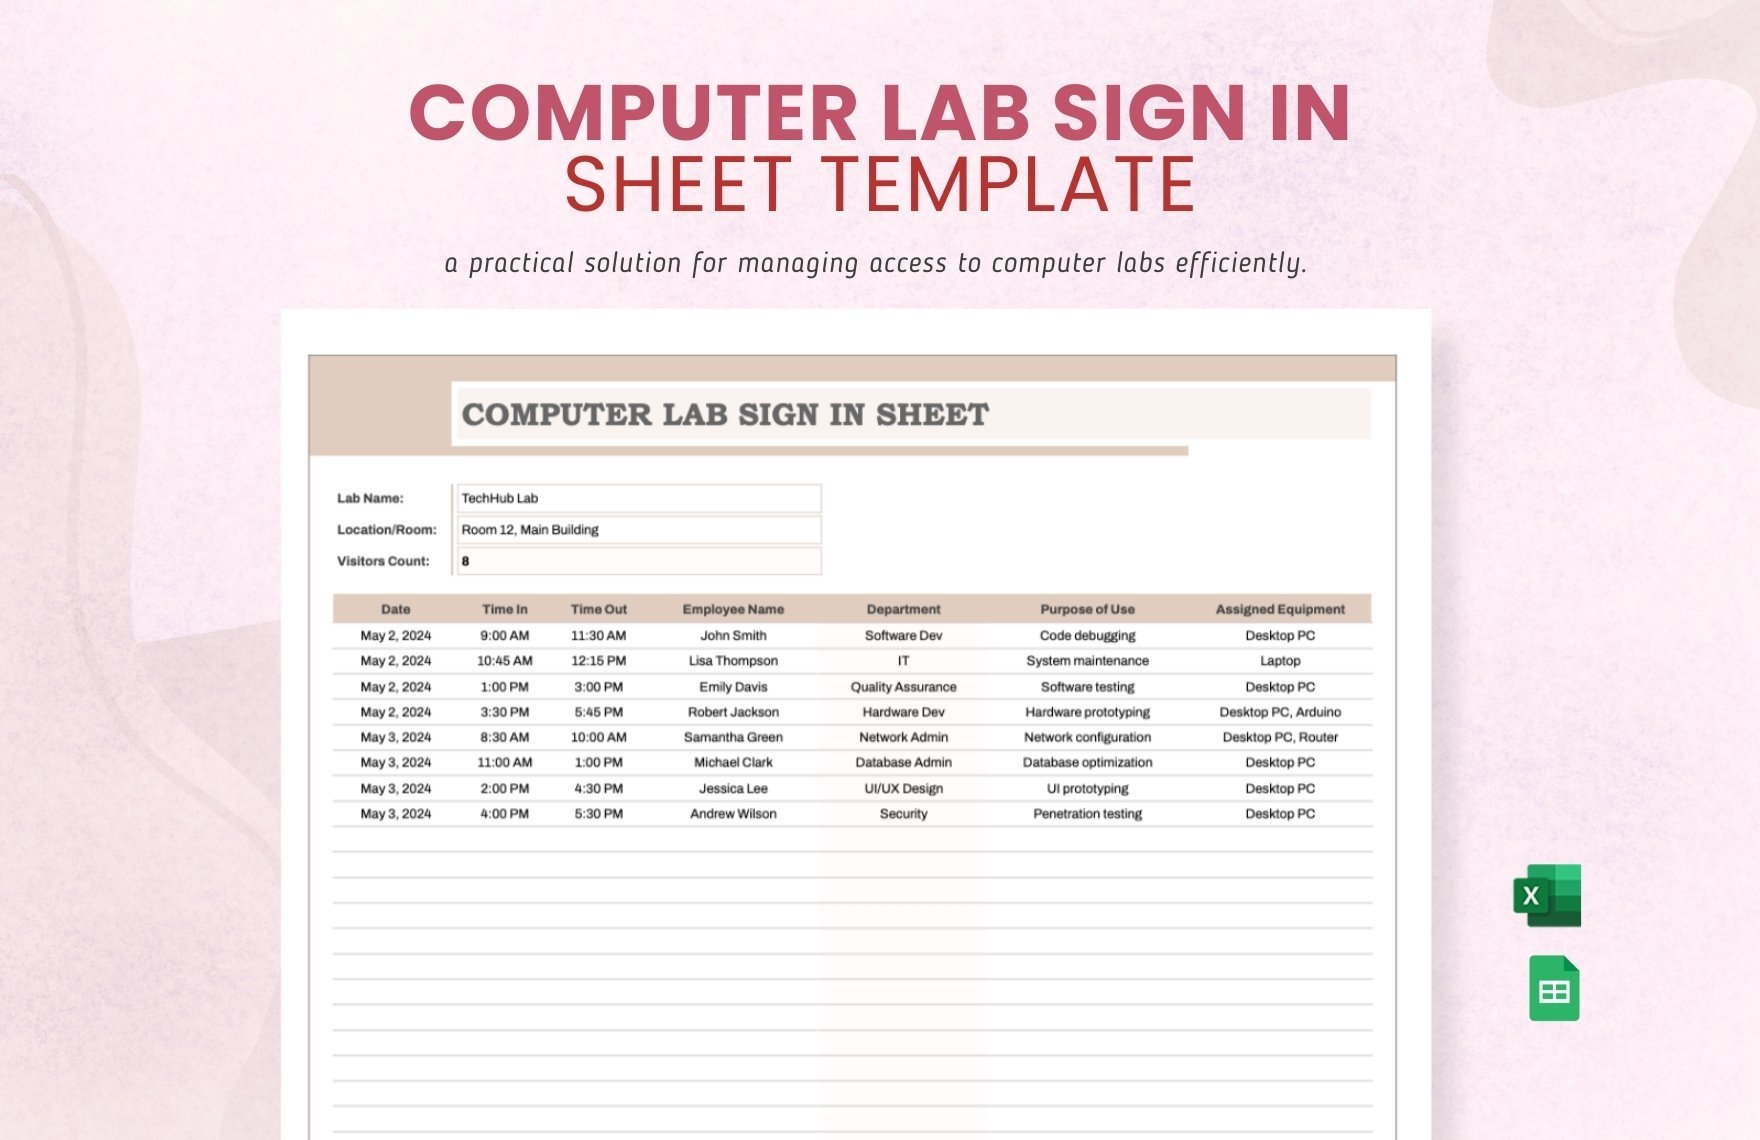 Computer Lab Sign in Sheet Template in Excel, Google Sheets